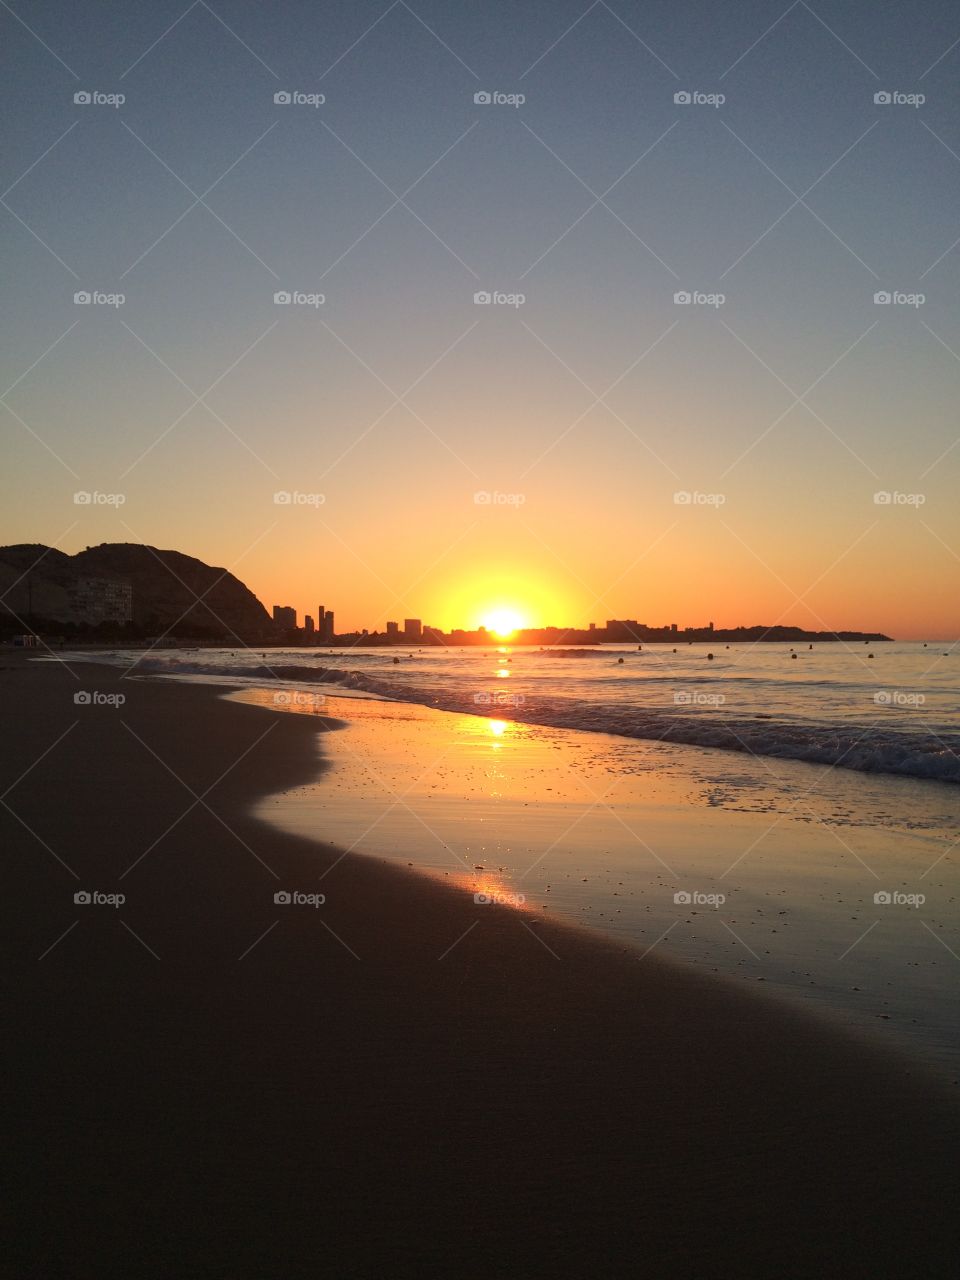 Sunrise on the beach. The sunrise from Playa del Postiguet in Alicante, Spain